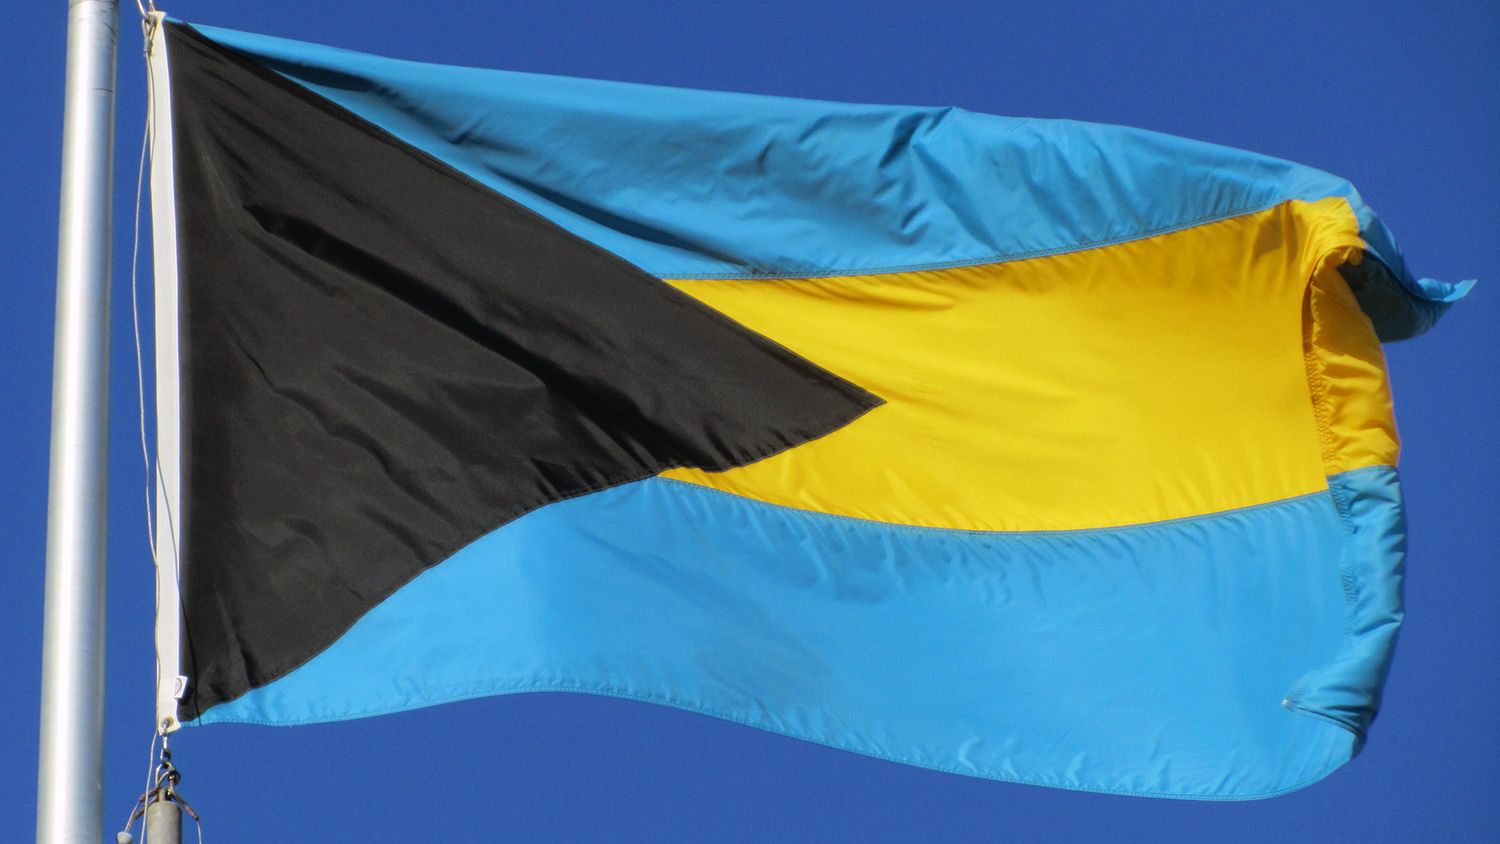 Blue flag with a yellow stripe and black triangle, Bahamas flag